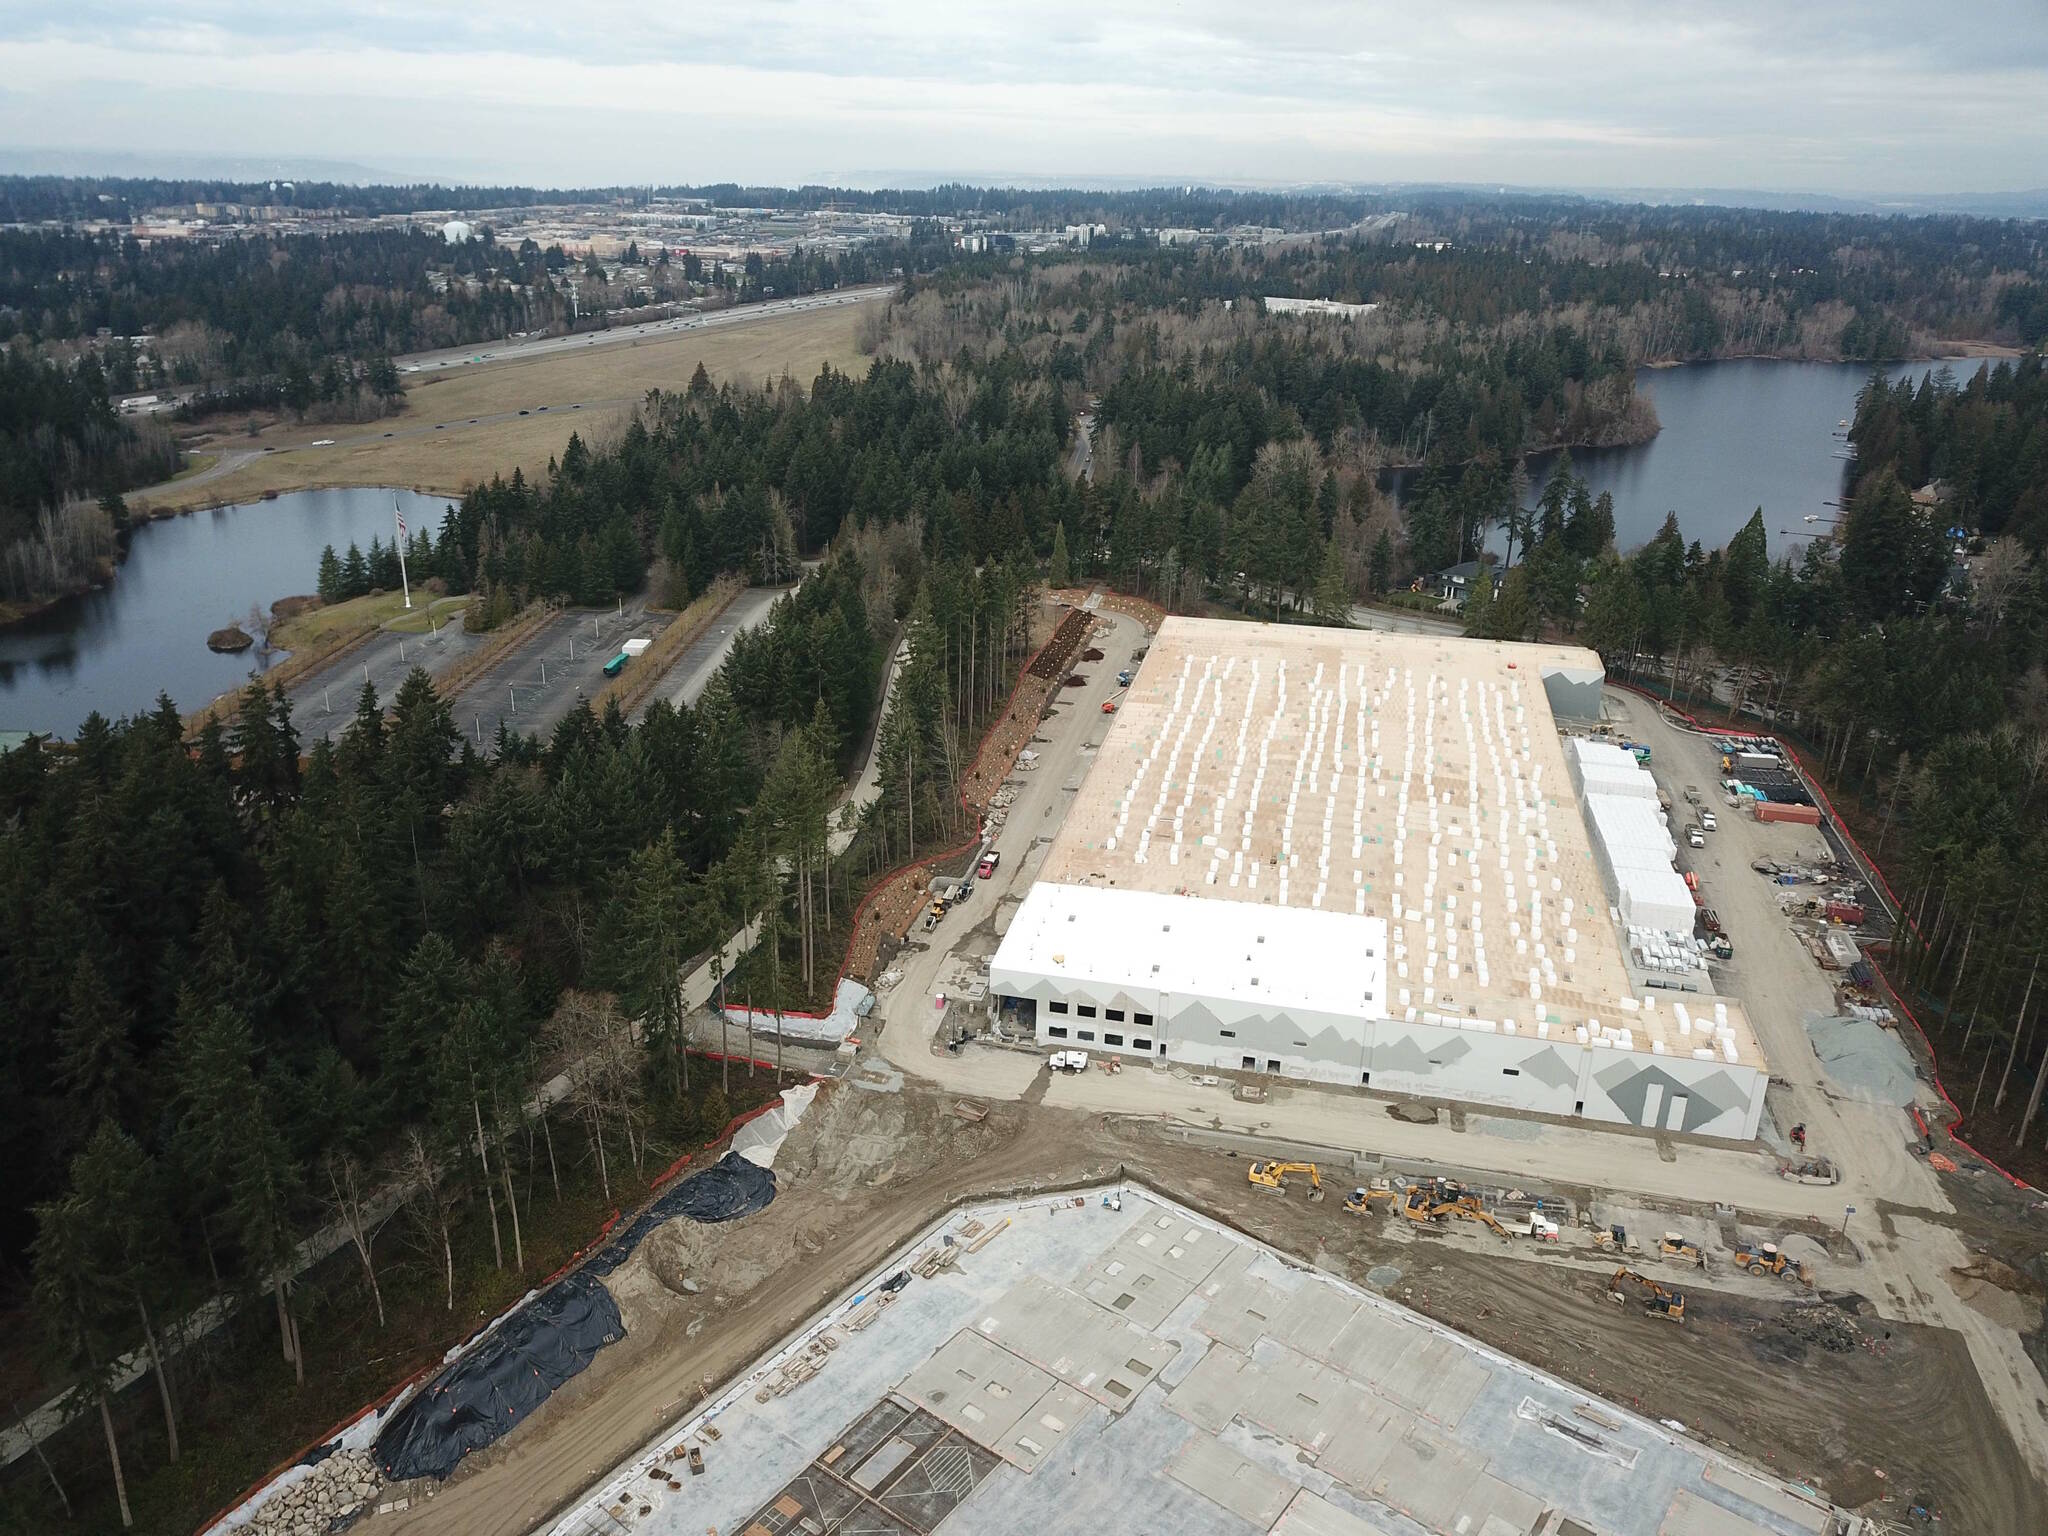 Buildings A and B of Woodbridge’s campus plan on the former Weyerhaeuser campus are projected to come online this year. Photo by Bruce Honda.